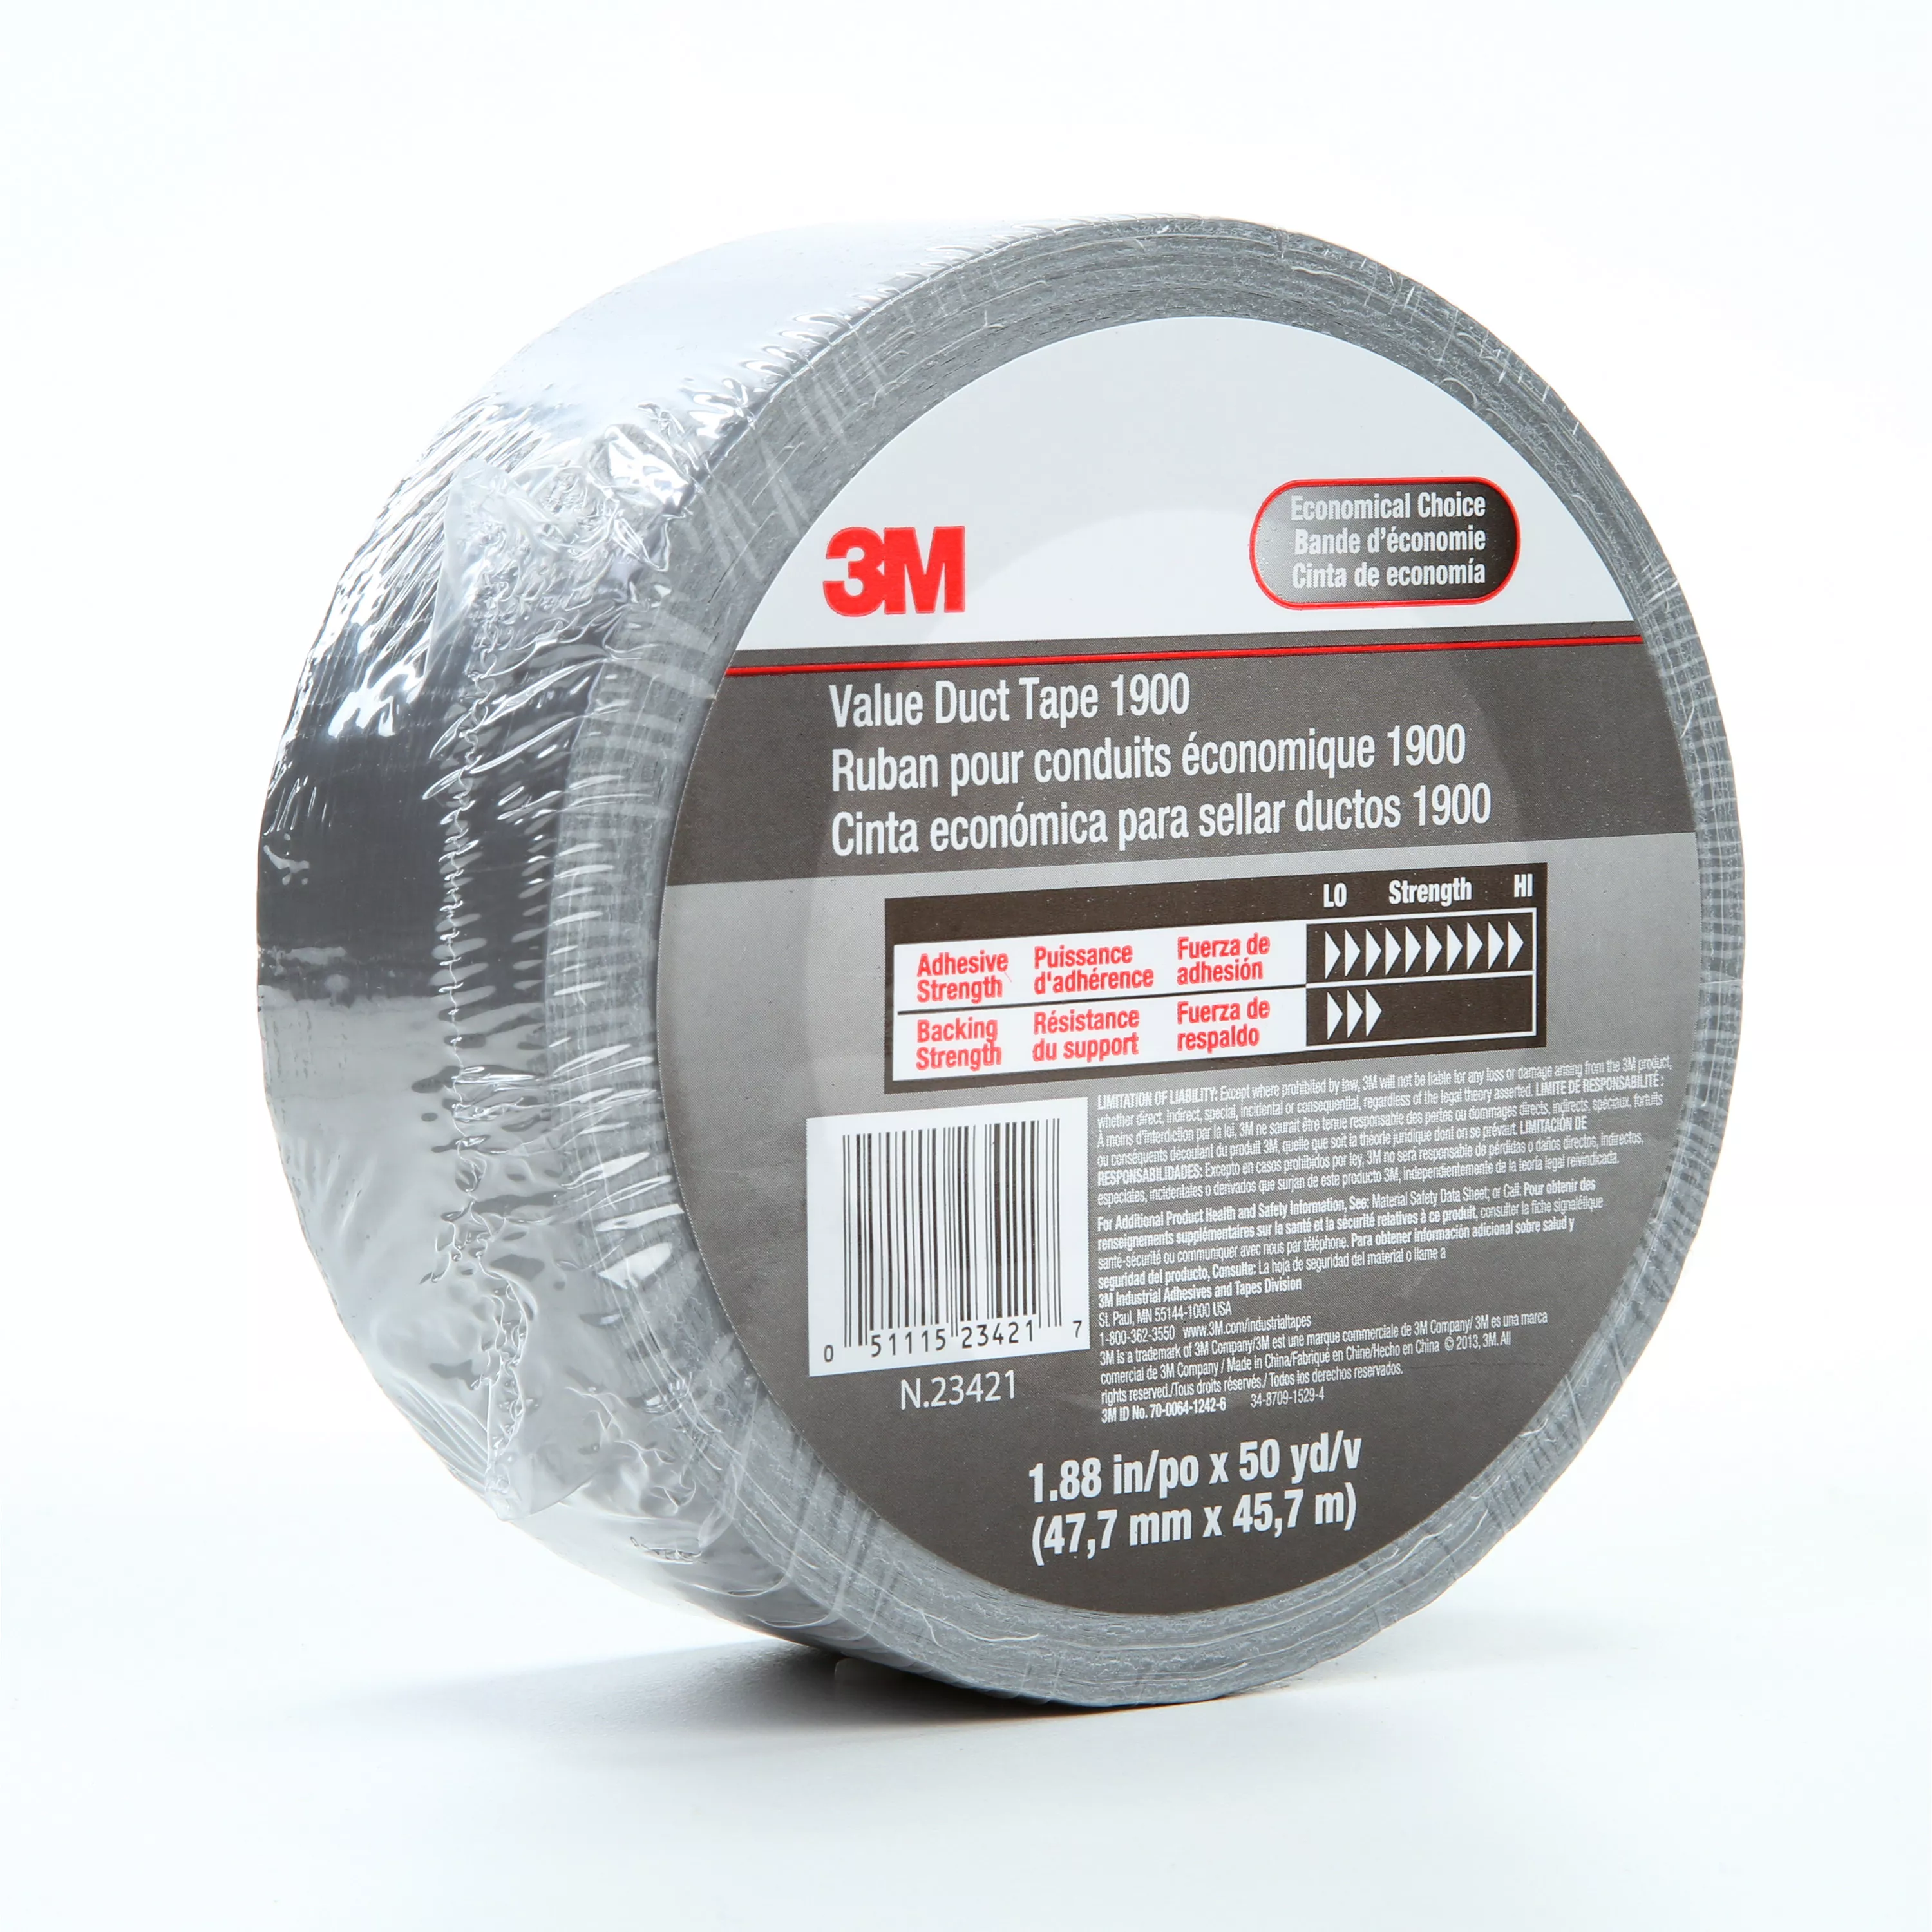 3M™ Value Duct Tape 1900, Silver, 1.88 in x 50 yd, 5.8 mil, 24
Rolls/Case,